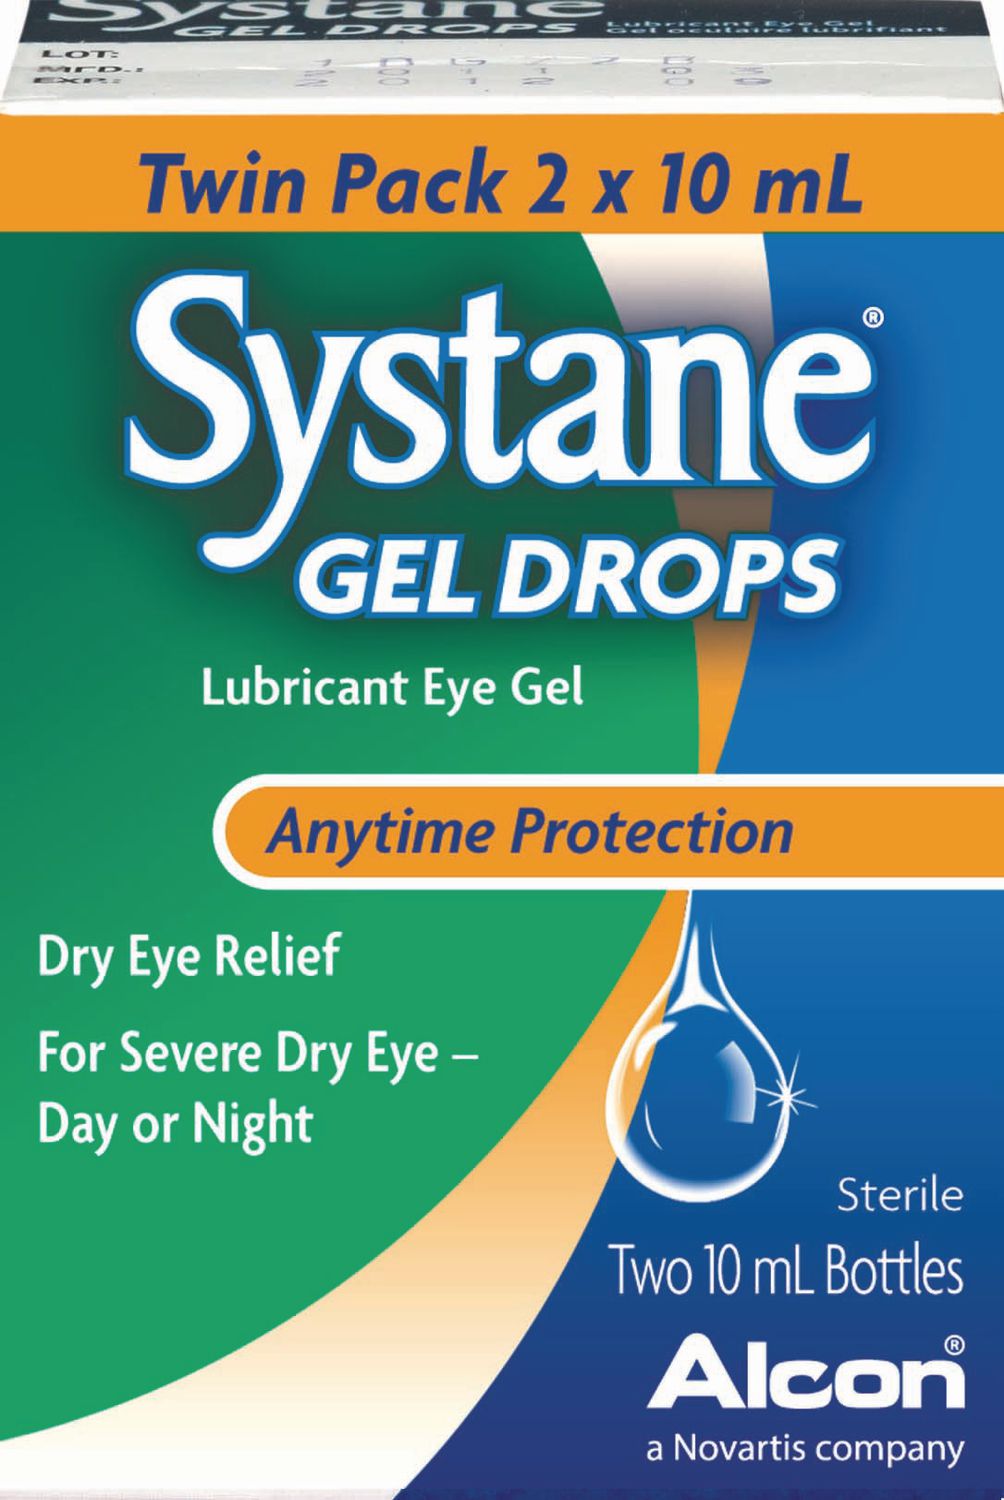 Systane Gel Drops Lubricant Eye Gel Anytime Protection Sterile Twin Pack -  20 ml